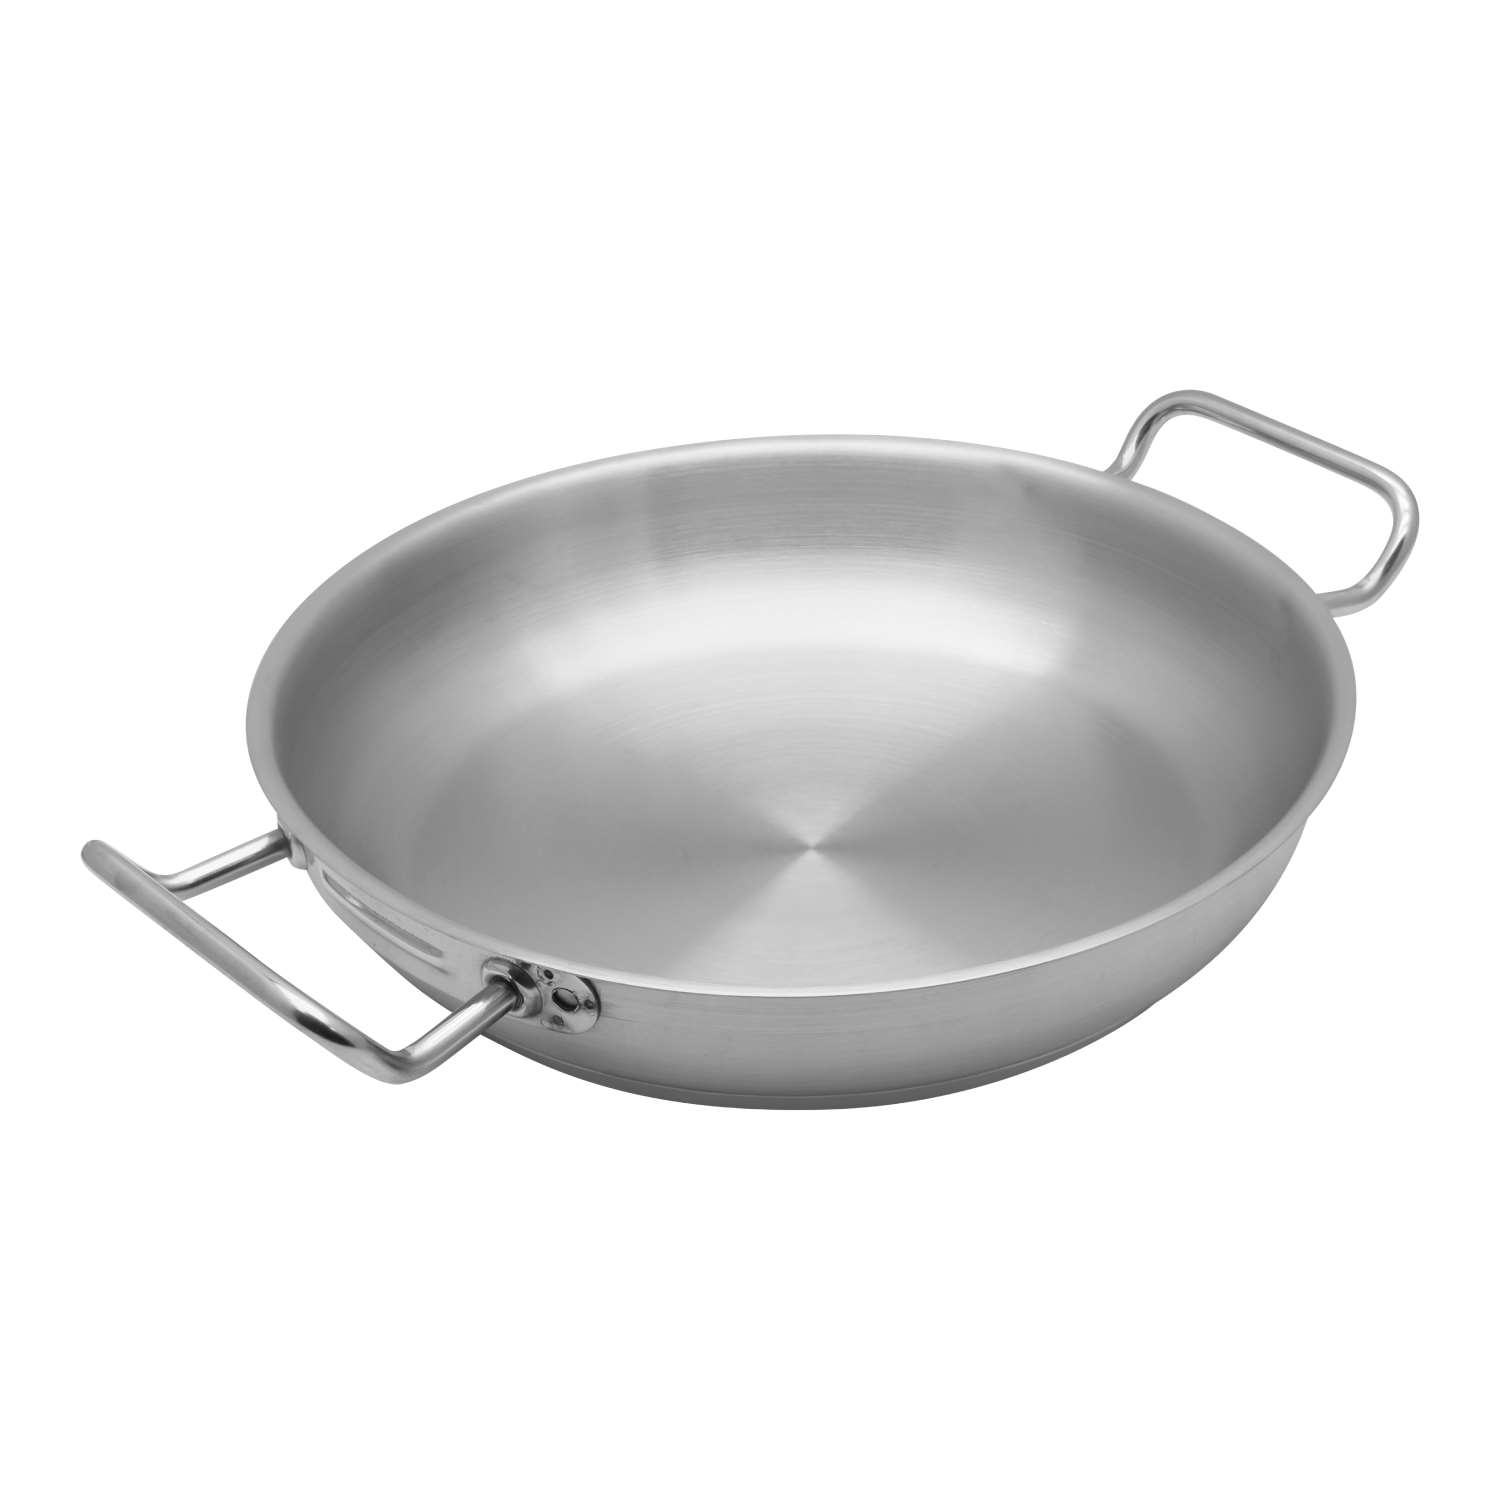 Chefset Steel Fry Pan With Side Handle 24Cm